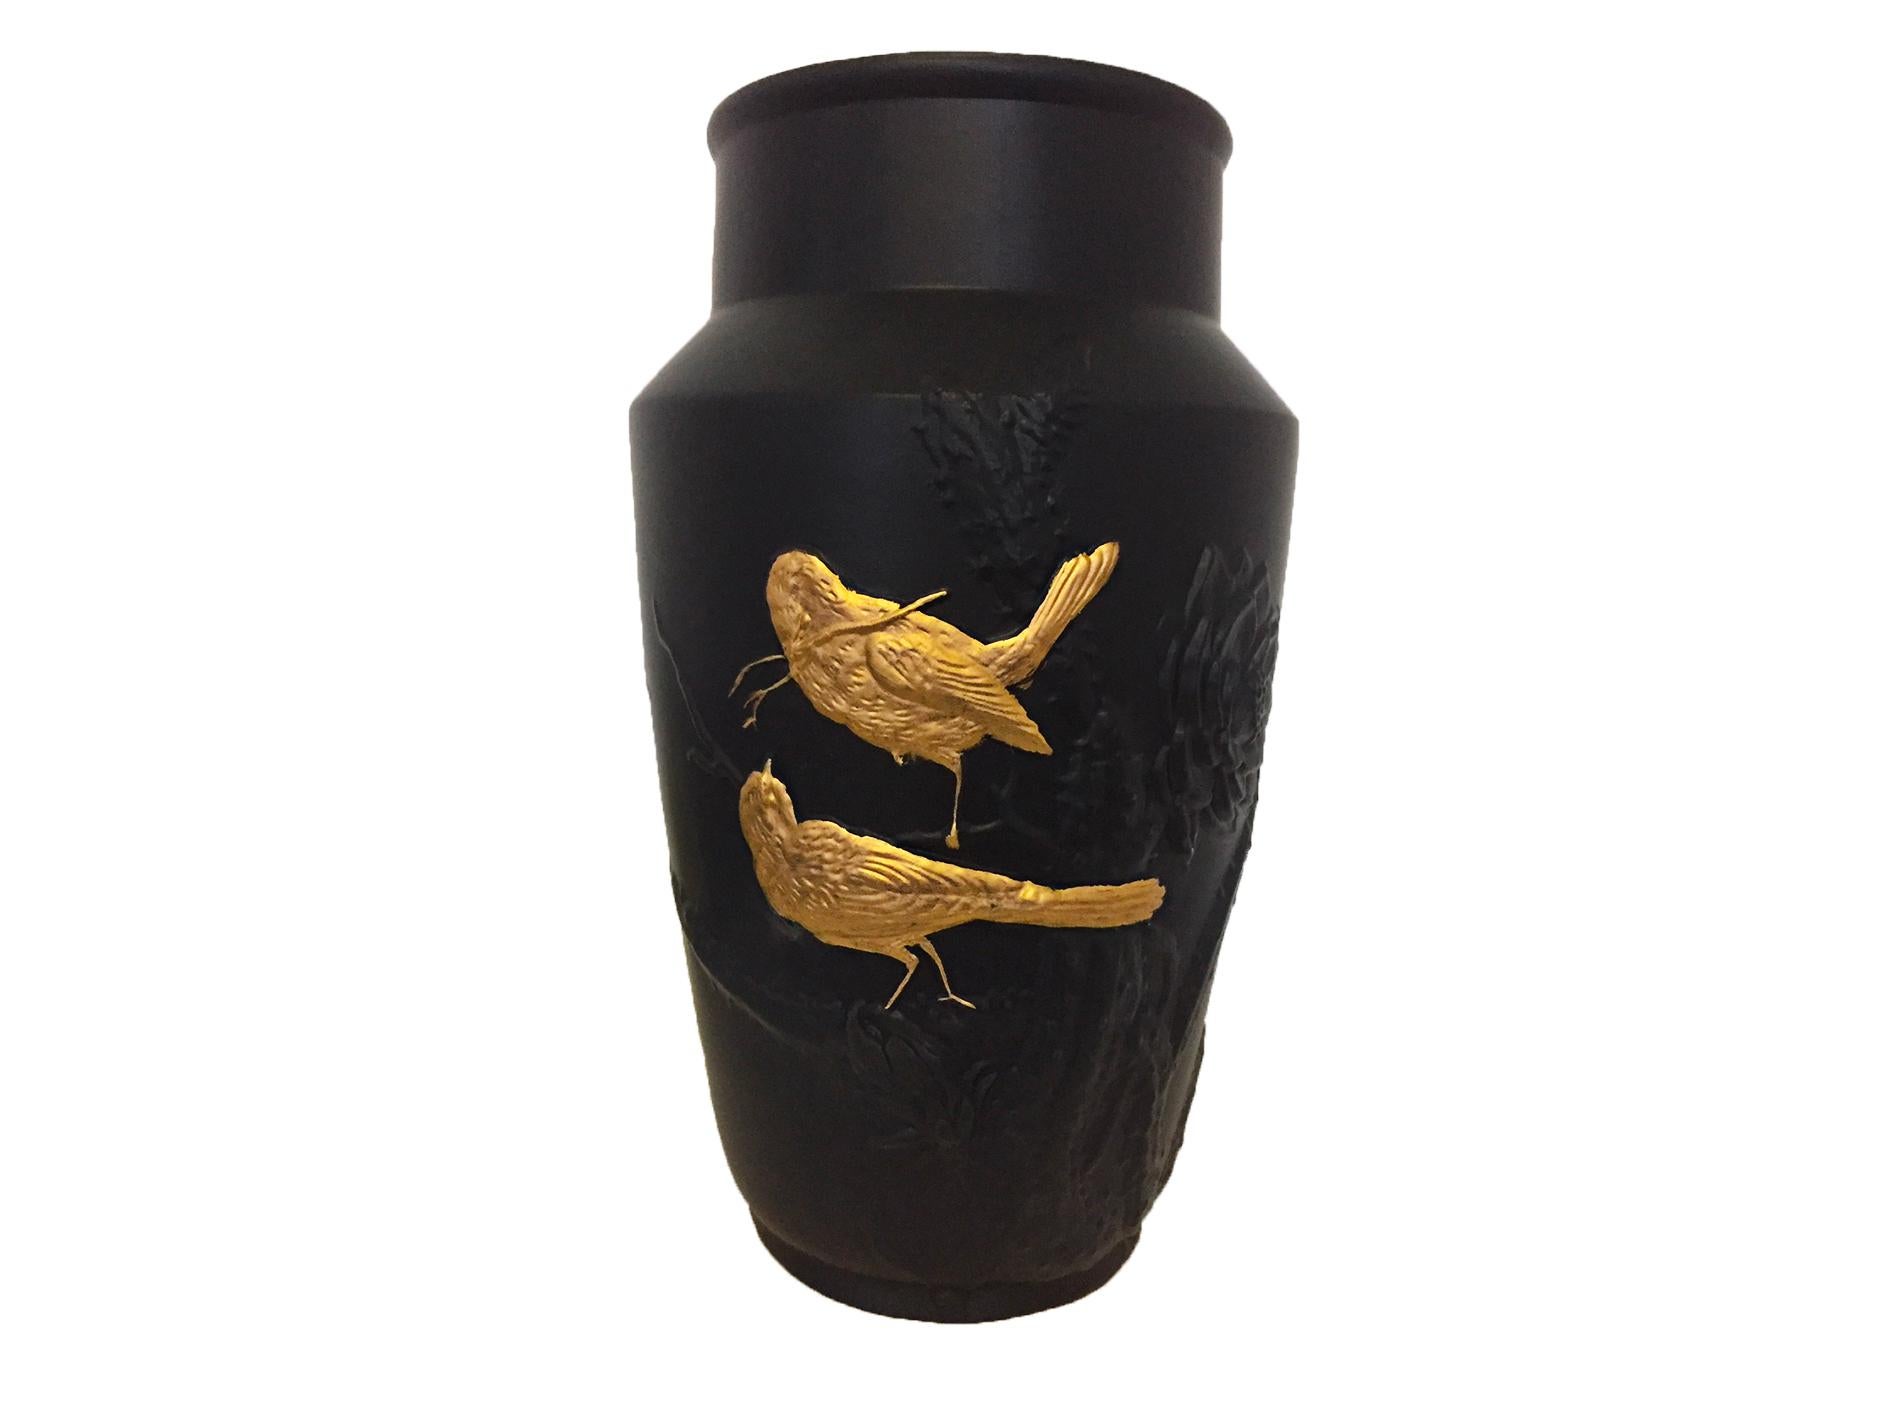 Handmade Tokyo gold Art Nouveau vase, manufactured by one the oldest French ceramic makers in France (open since 1736). 
This stoneware vase is inspired by the themes of Art Nouveau with black flowers and gold birds in relief.
The frost proof